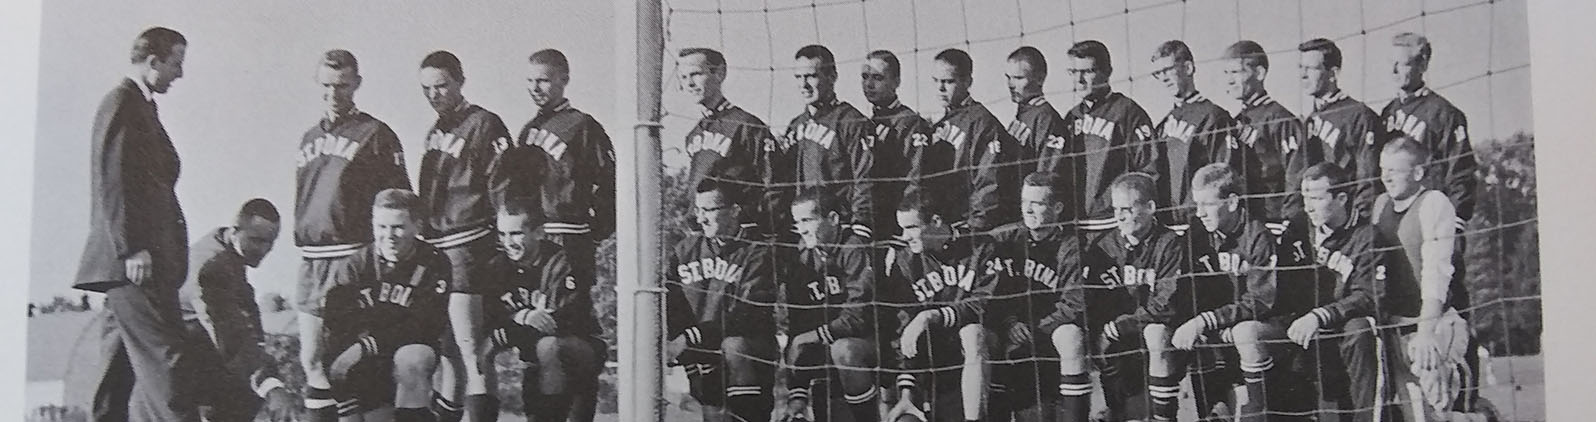 Pictured_The Bennett brothers at far right, in back row